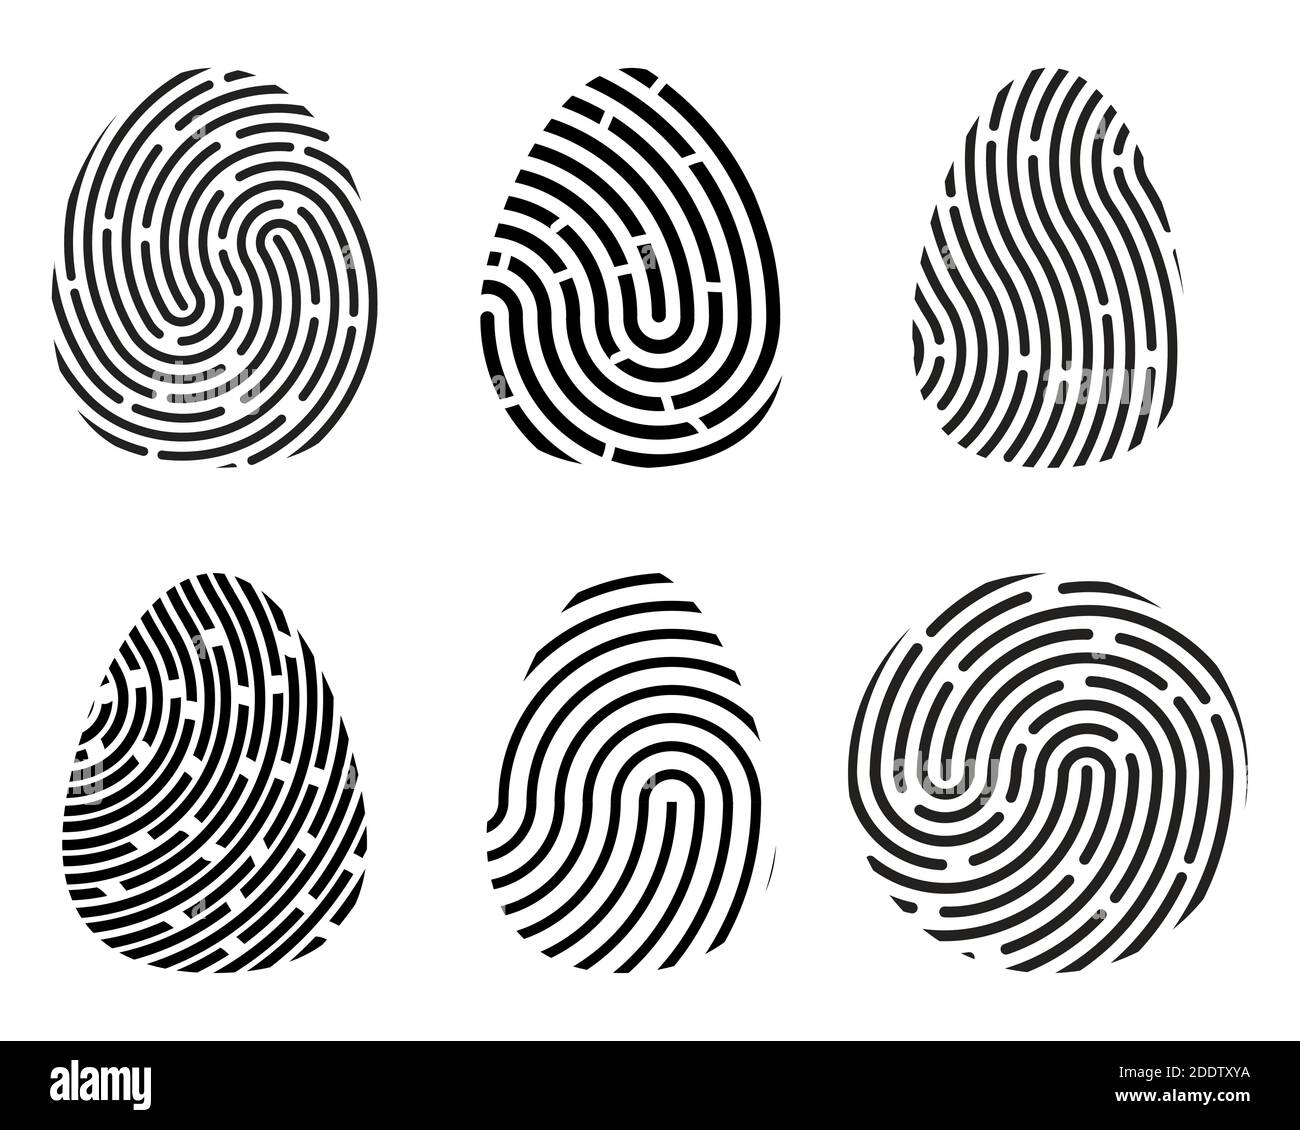 Fingerprint icon set. Unique finger stamp silhouette shapes isolated on white background.  Black criminal identity symbol collection. Individual signa Stock Vector